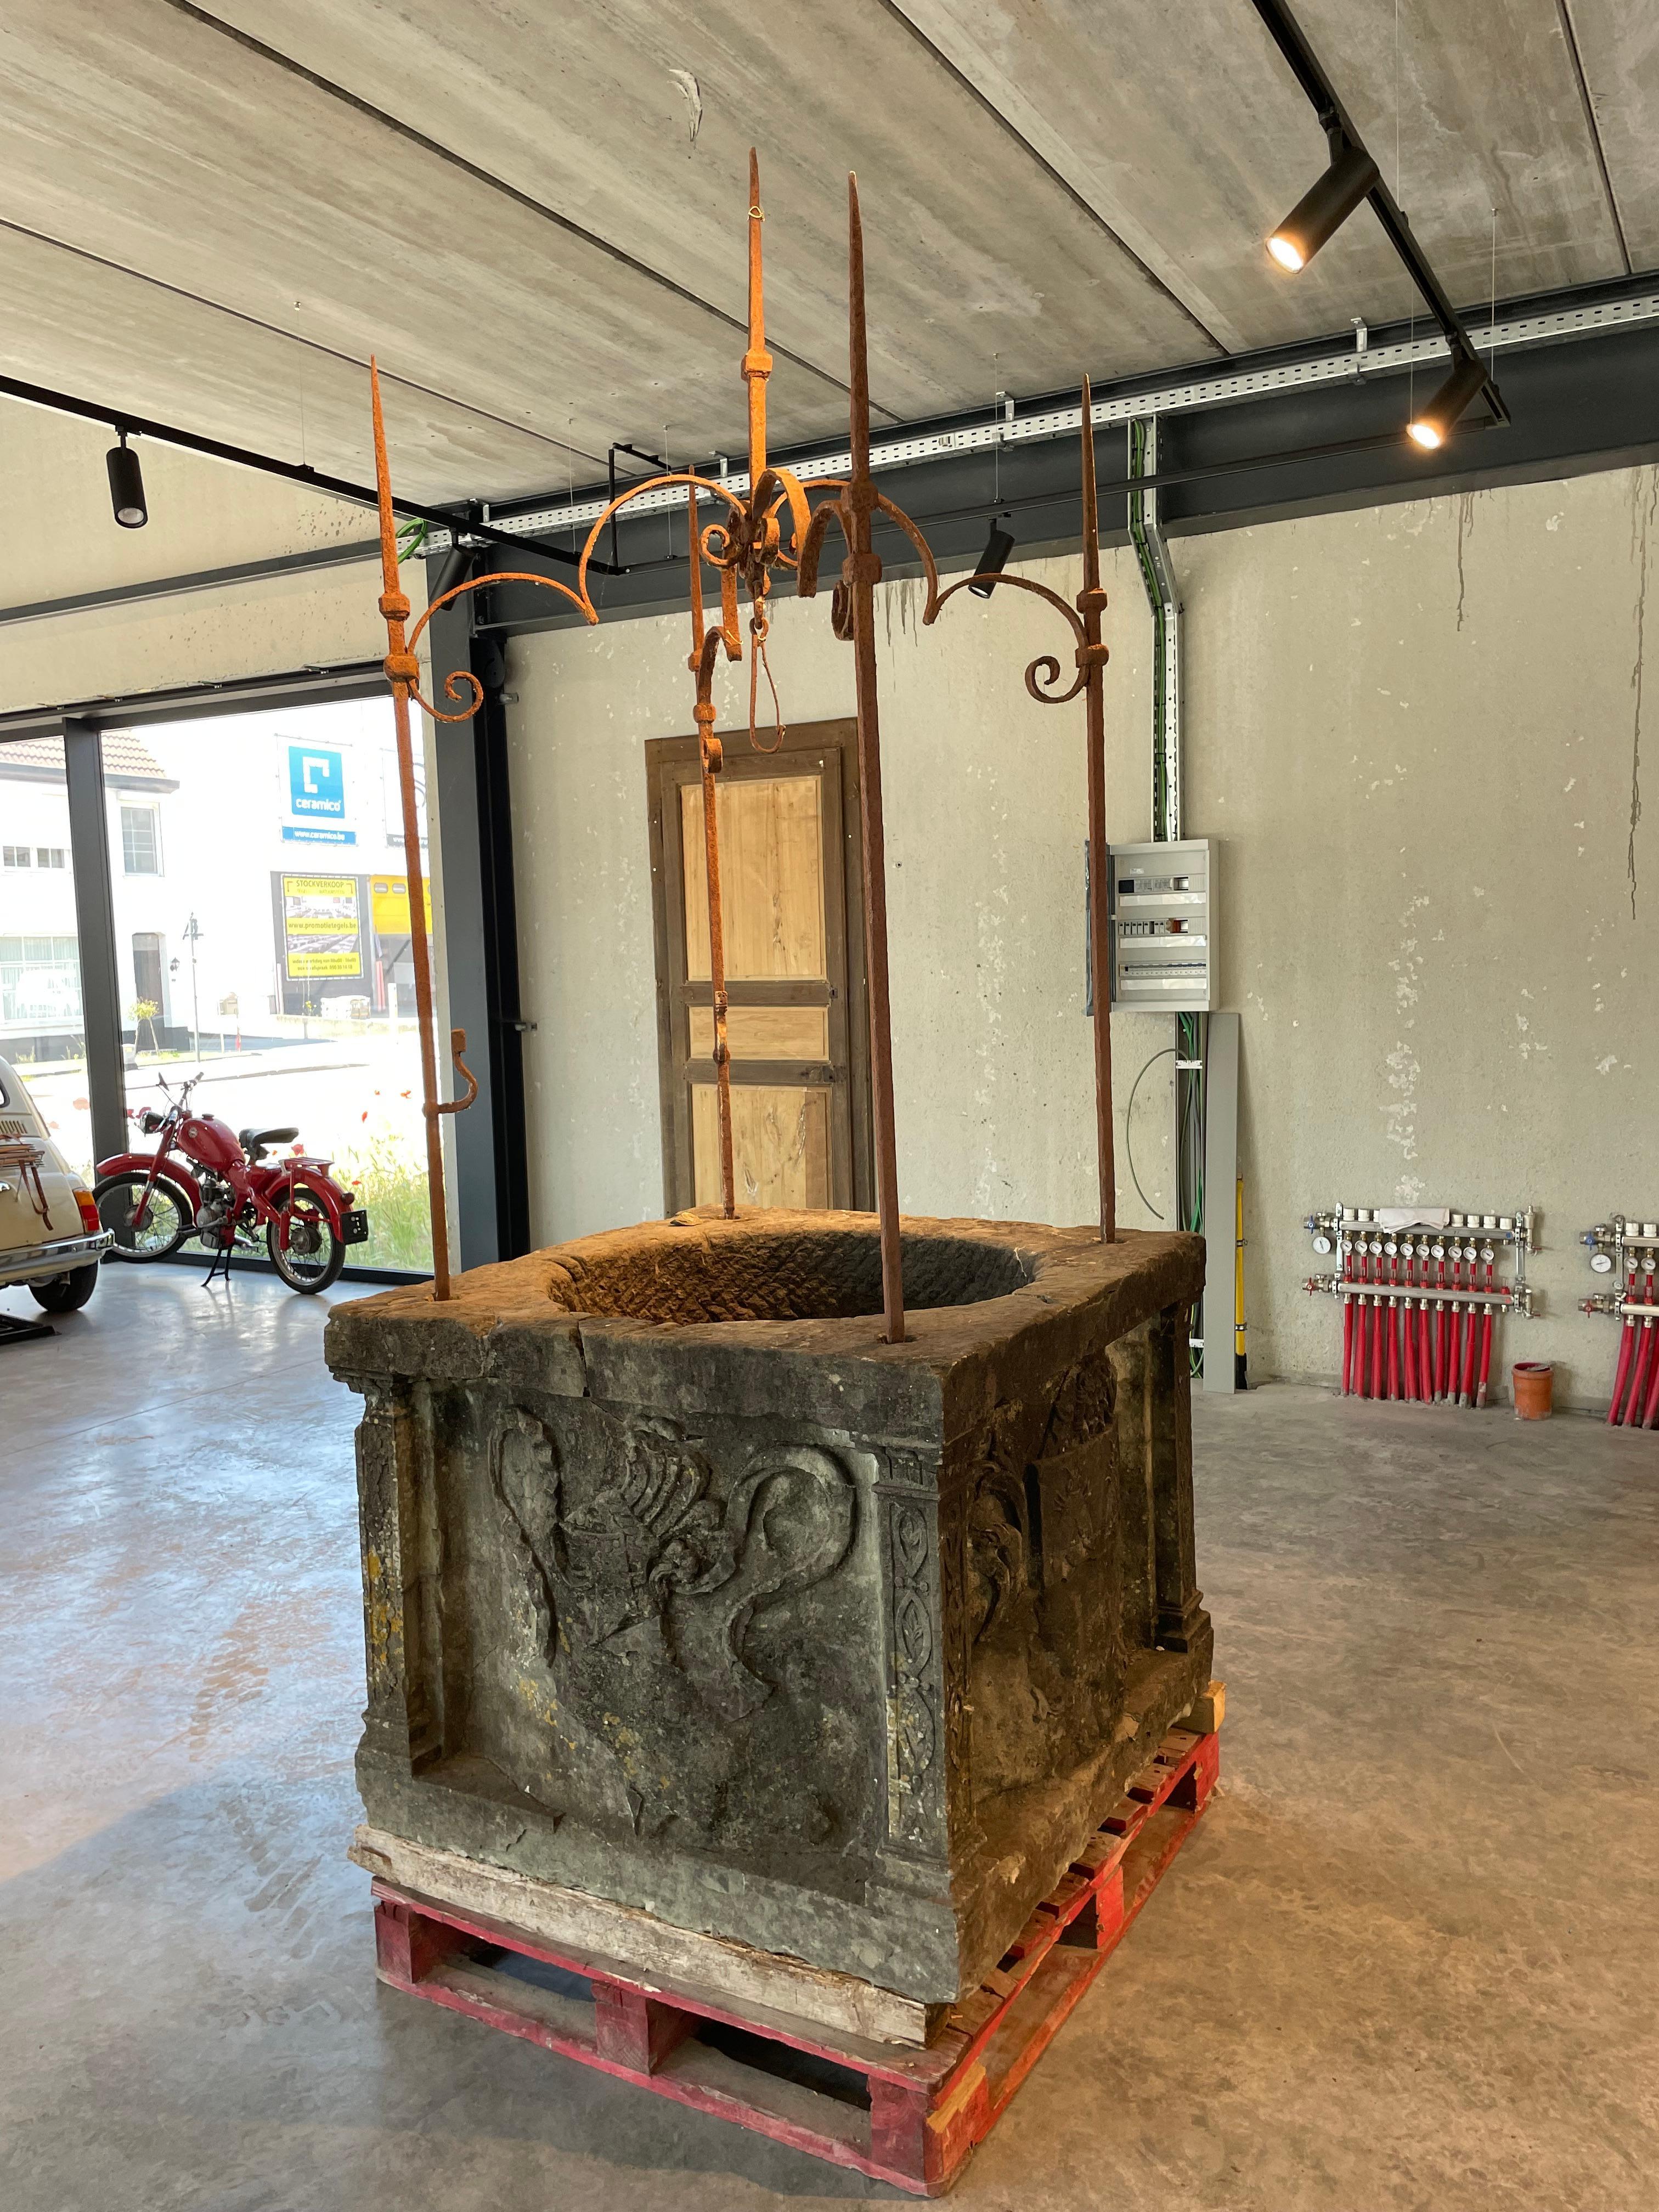 16th century wellhead from Venice, rare find, museum quality that needs a bit of restoration, done by us.
The stone it's made out is Italian Pietra Serena.